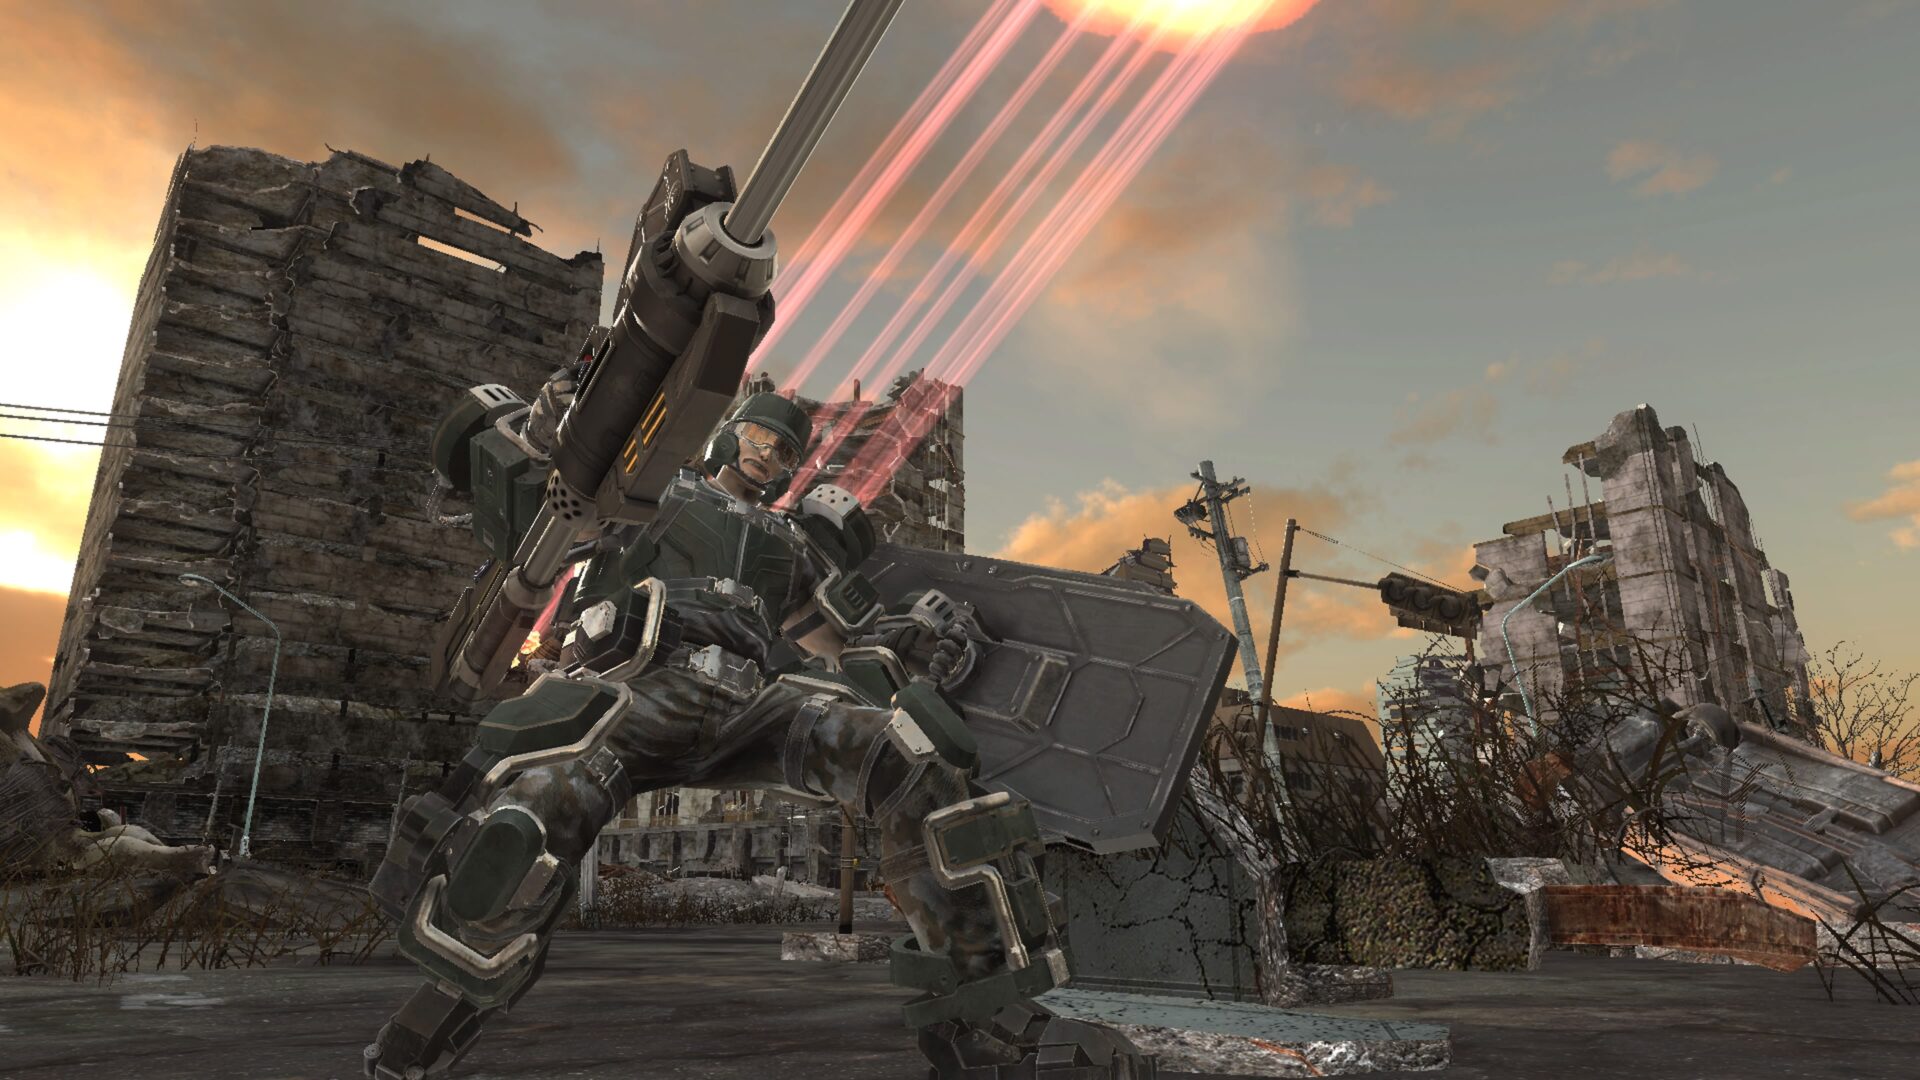 Earth Defense Force 6 Gets Tons of New Screenshots Showing Enemies